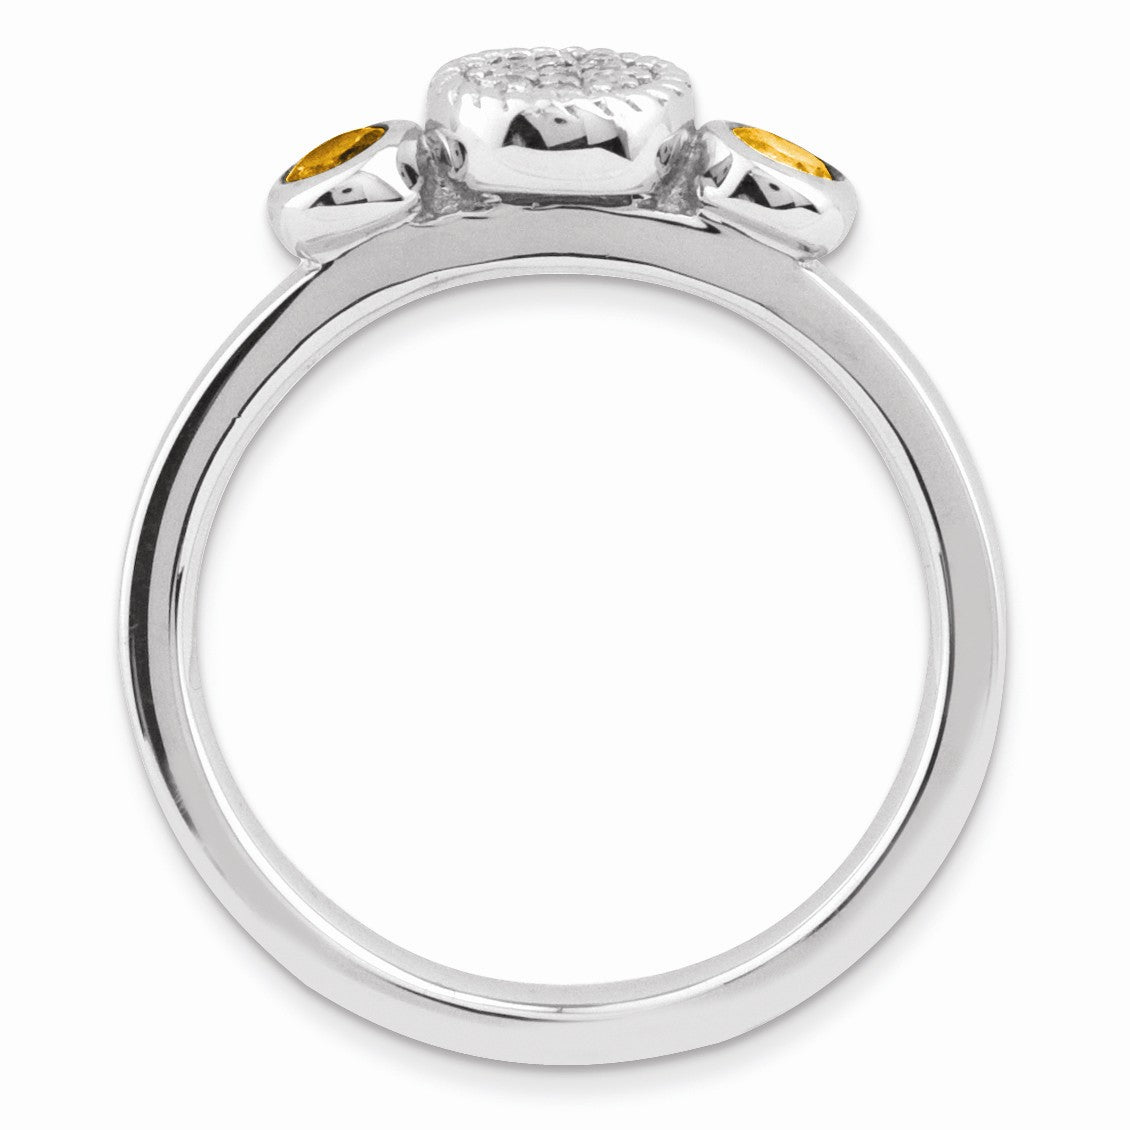 Alternate view of the Sterling Silver Stackable Citrine &amp; .05 Ctw HI/I3 Diamond Ring by The Black Bow Jewelry Co.